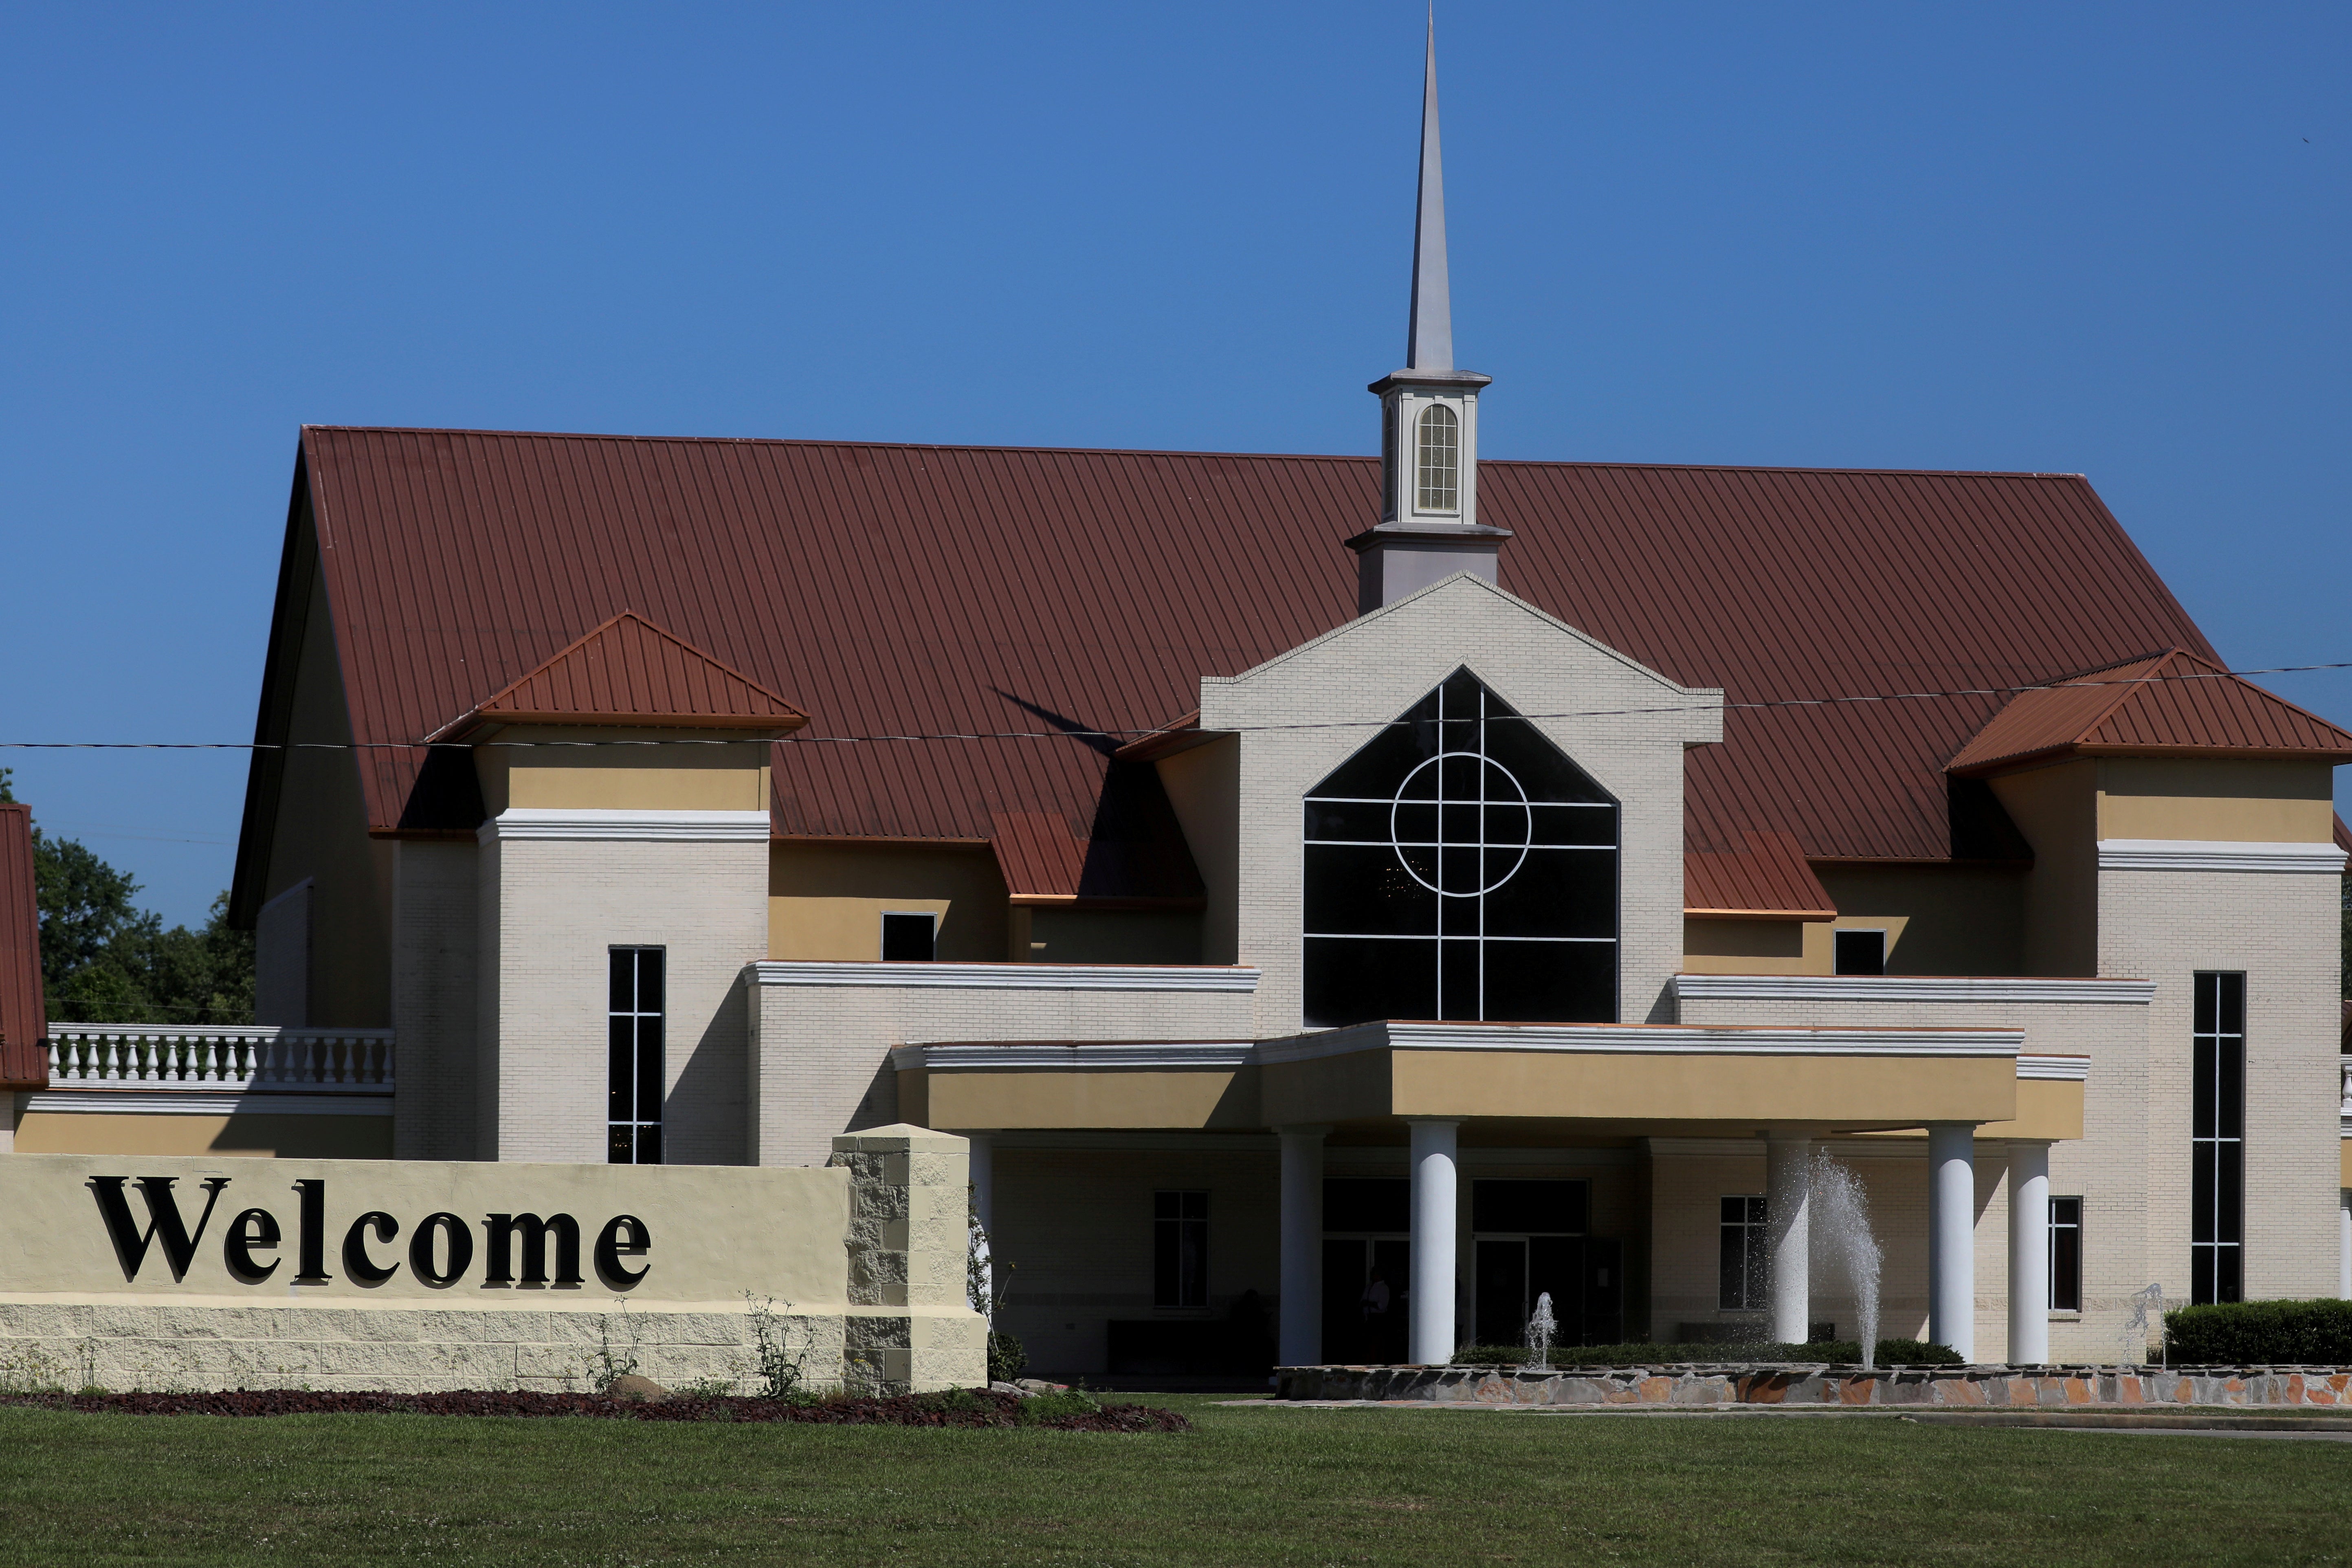 Exterior of church with welcome sign out front